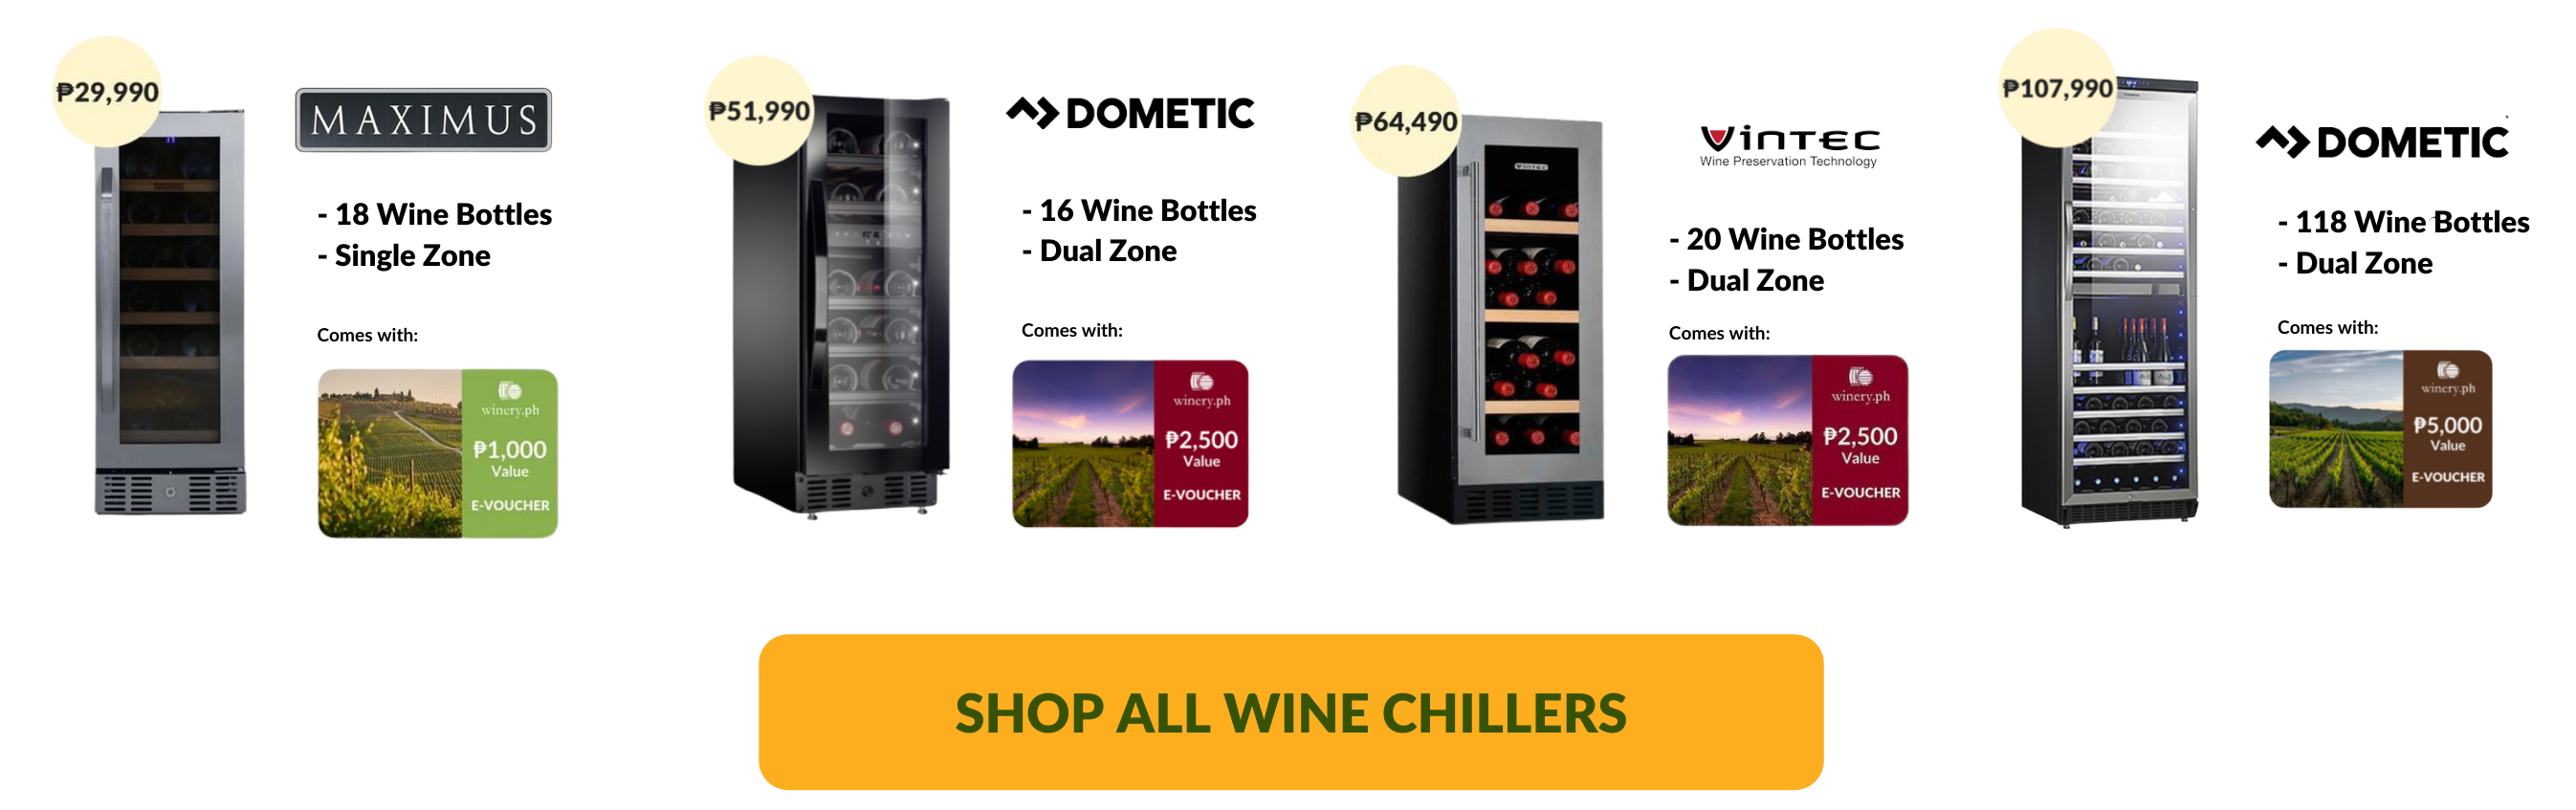 shop wine chillers in the philippines